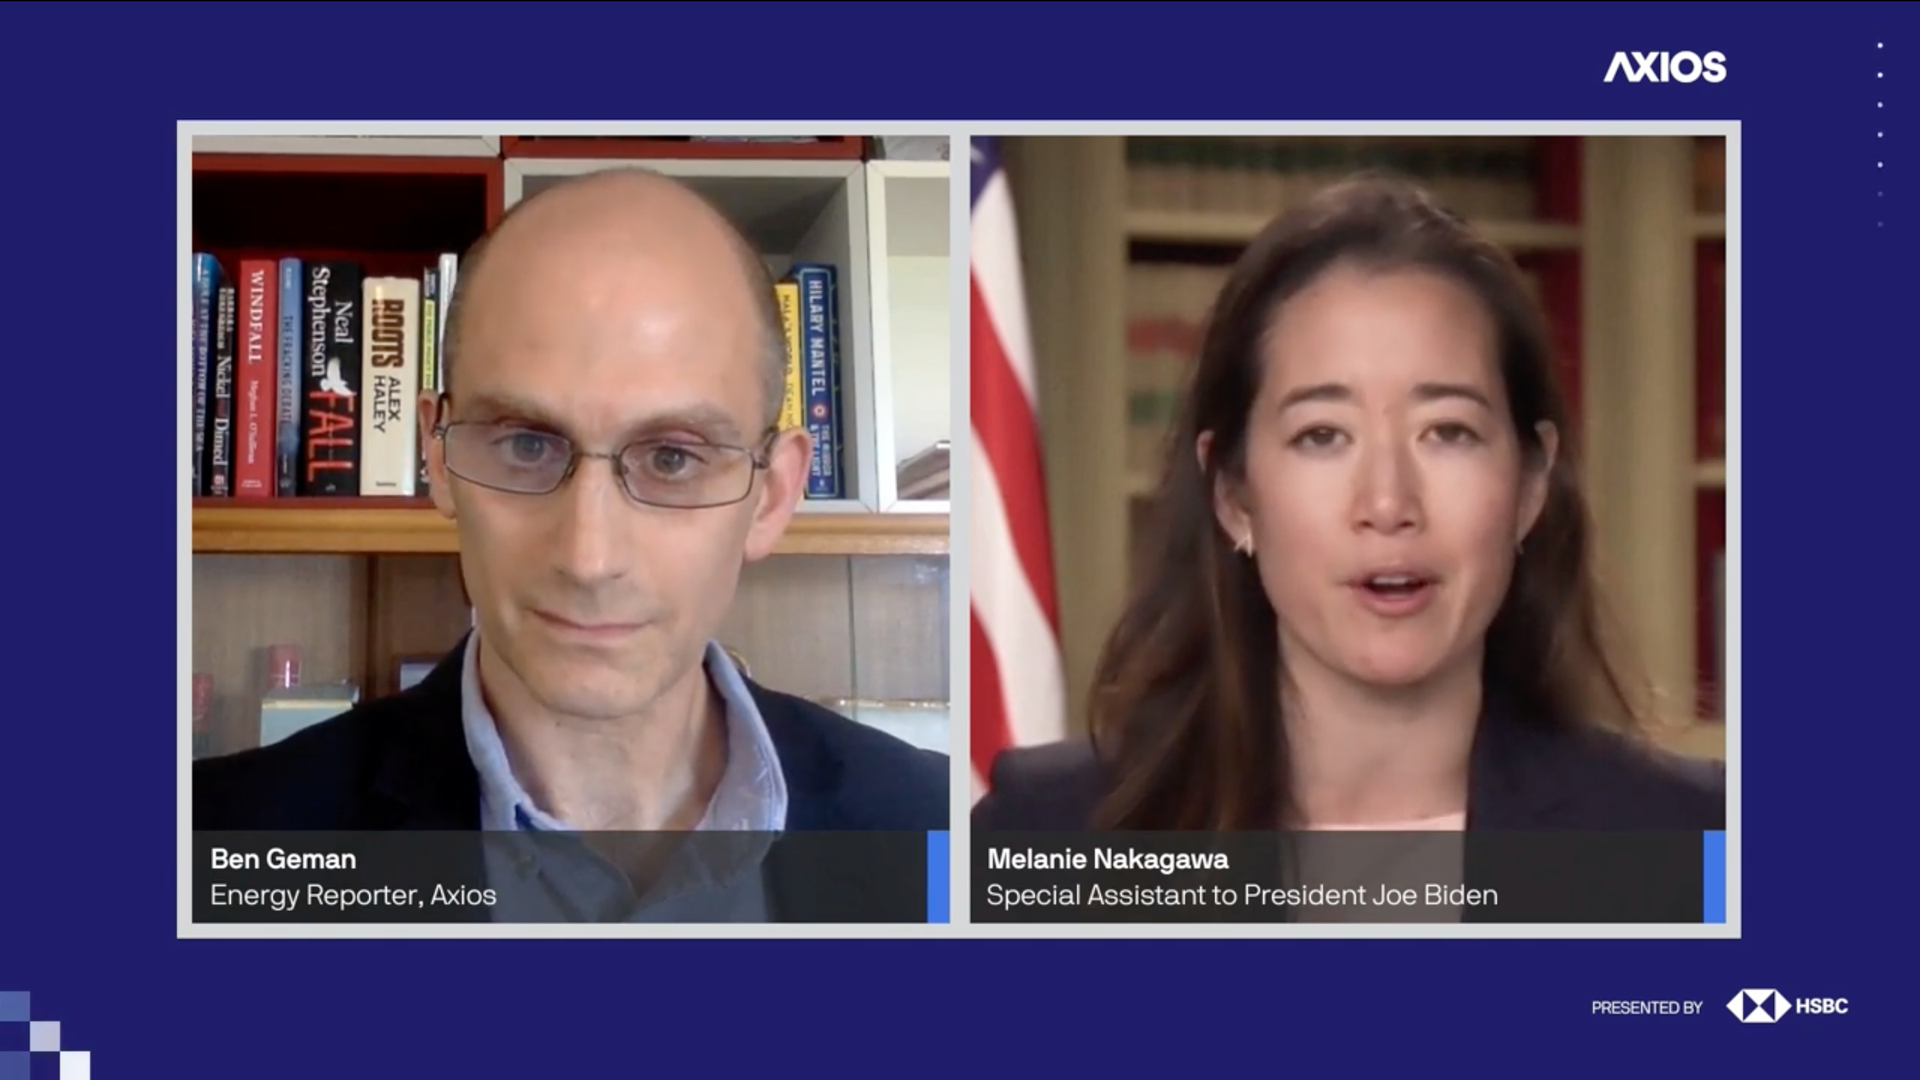 Screenshot taken from an Axios virtual event that has Axios' Ben Geman on the left and on the right, Melanie Nakagawa, Special assistant to president biden